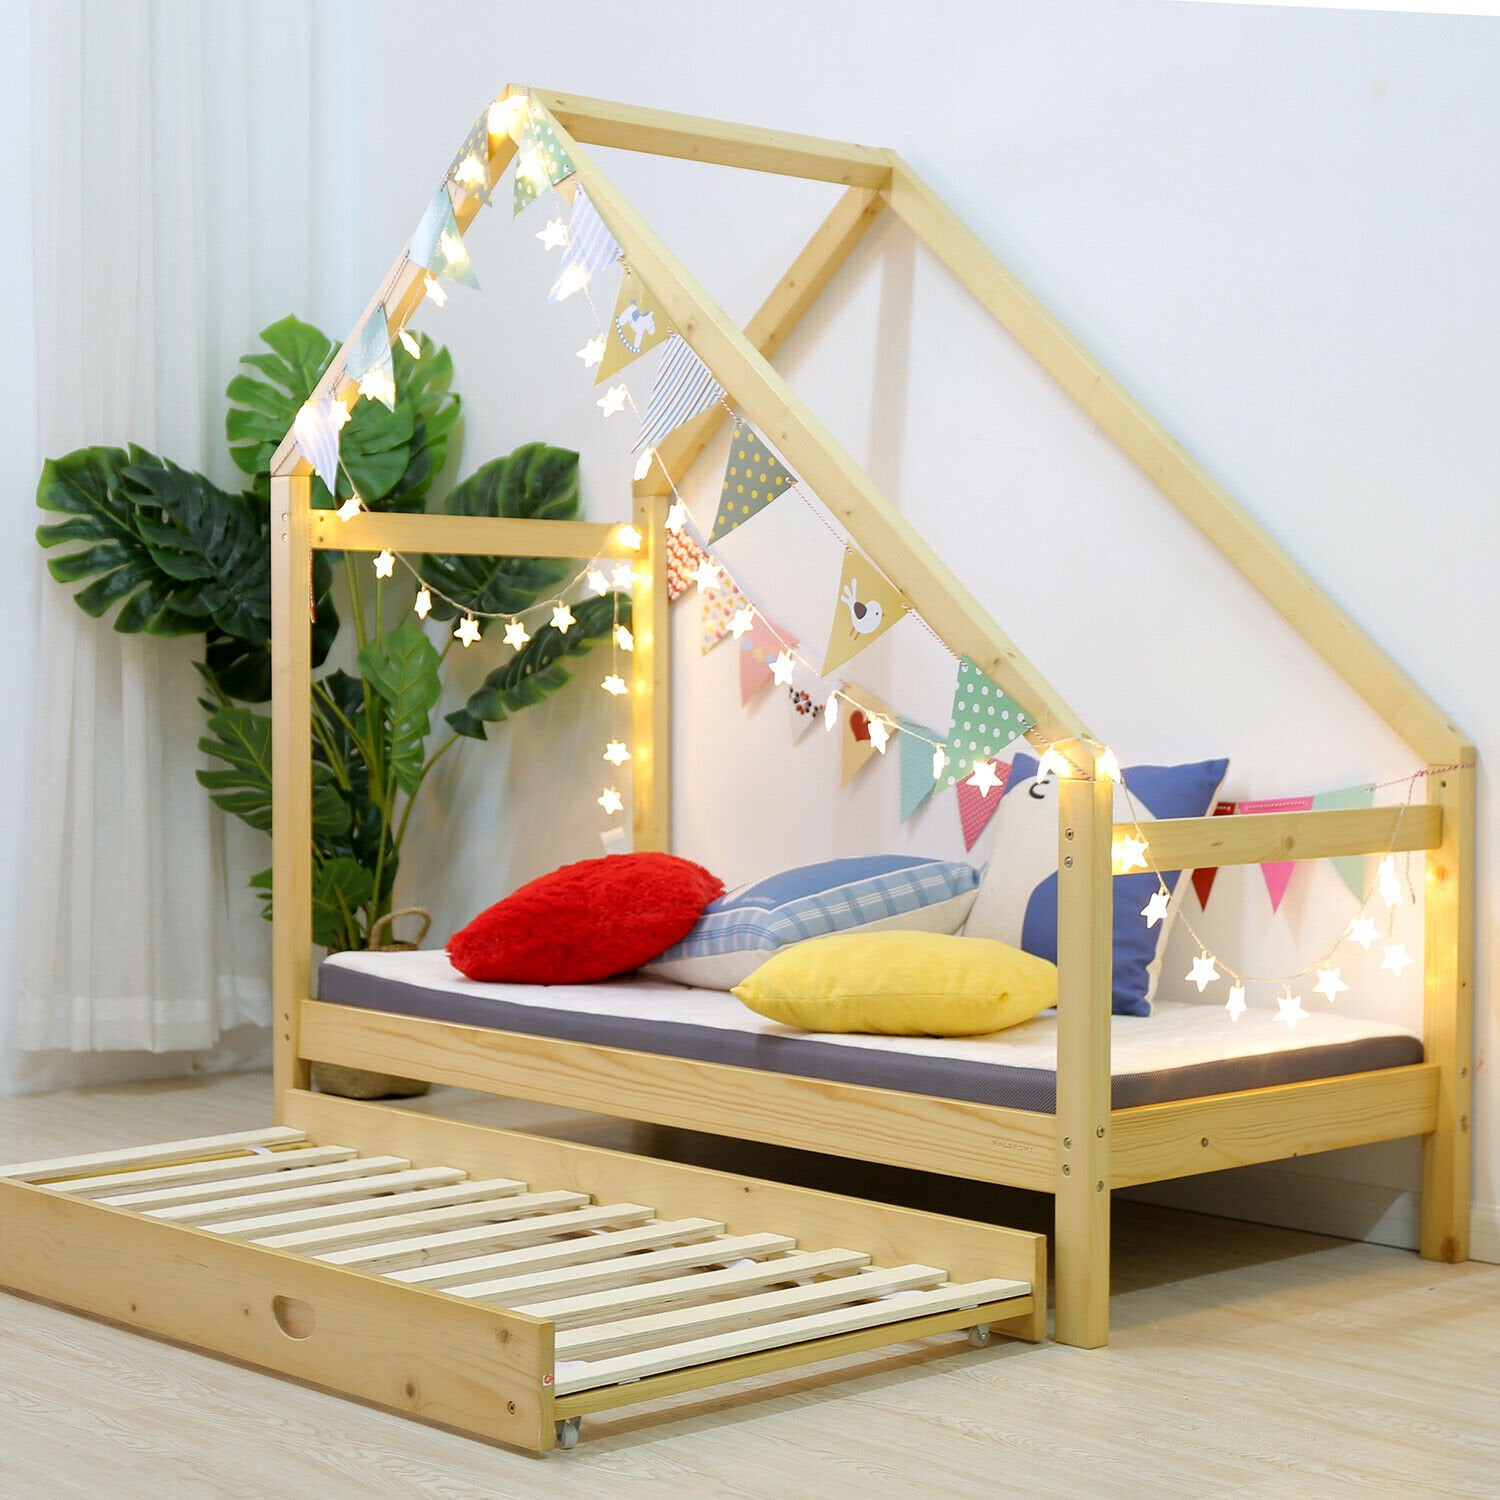 Walsport Style Bedroom 66 X29, Child Floor Bed Frame Toddler